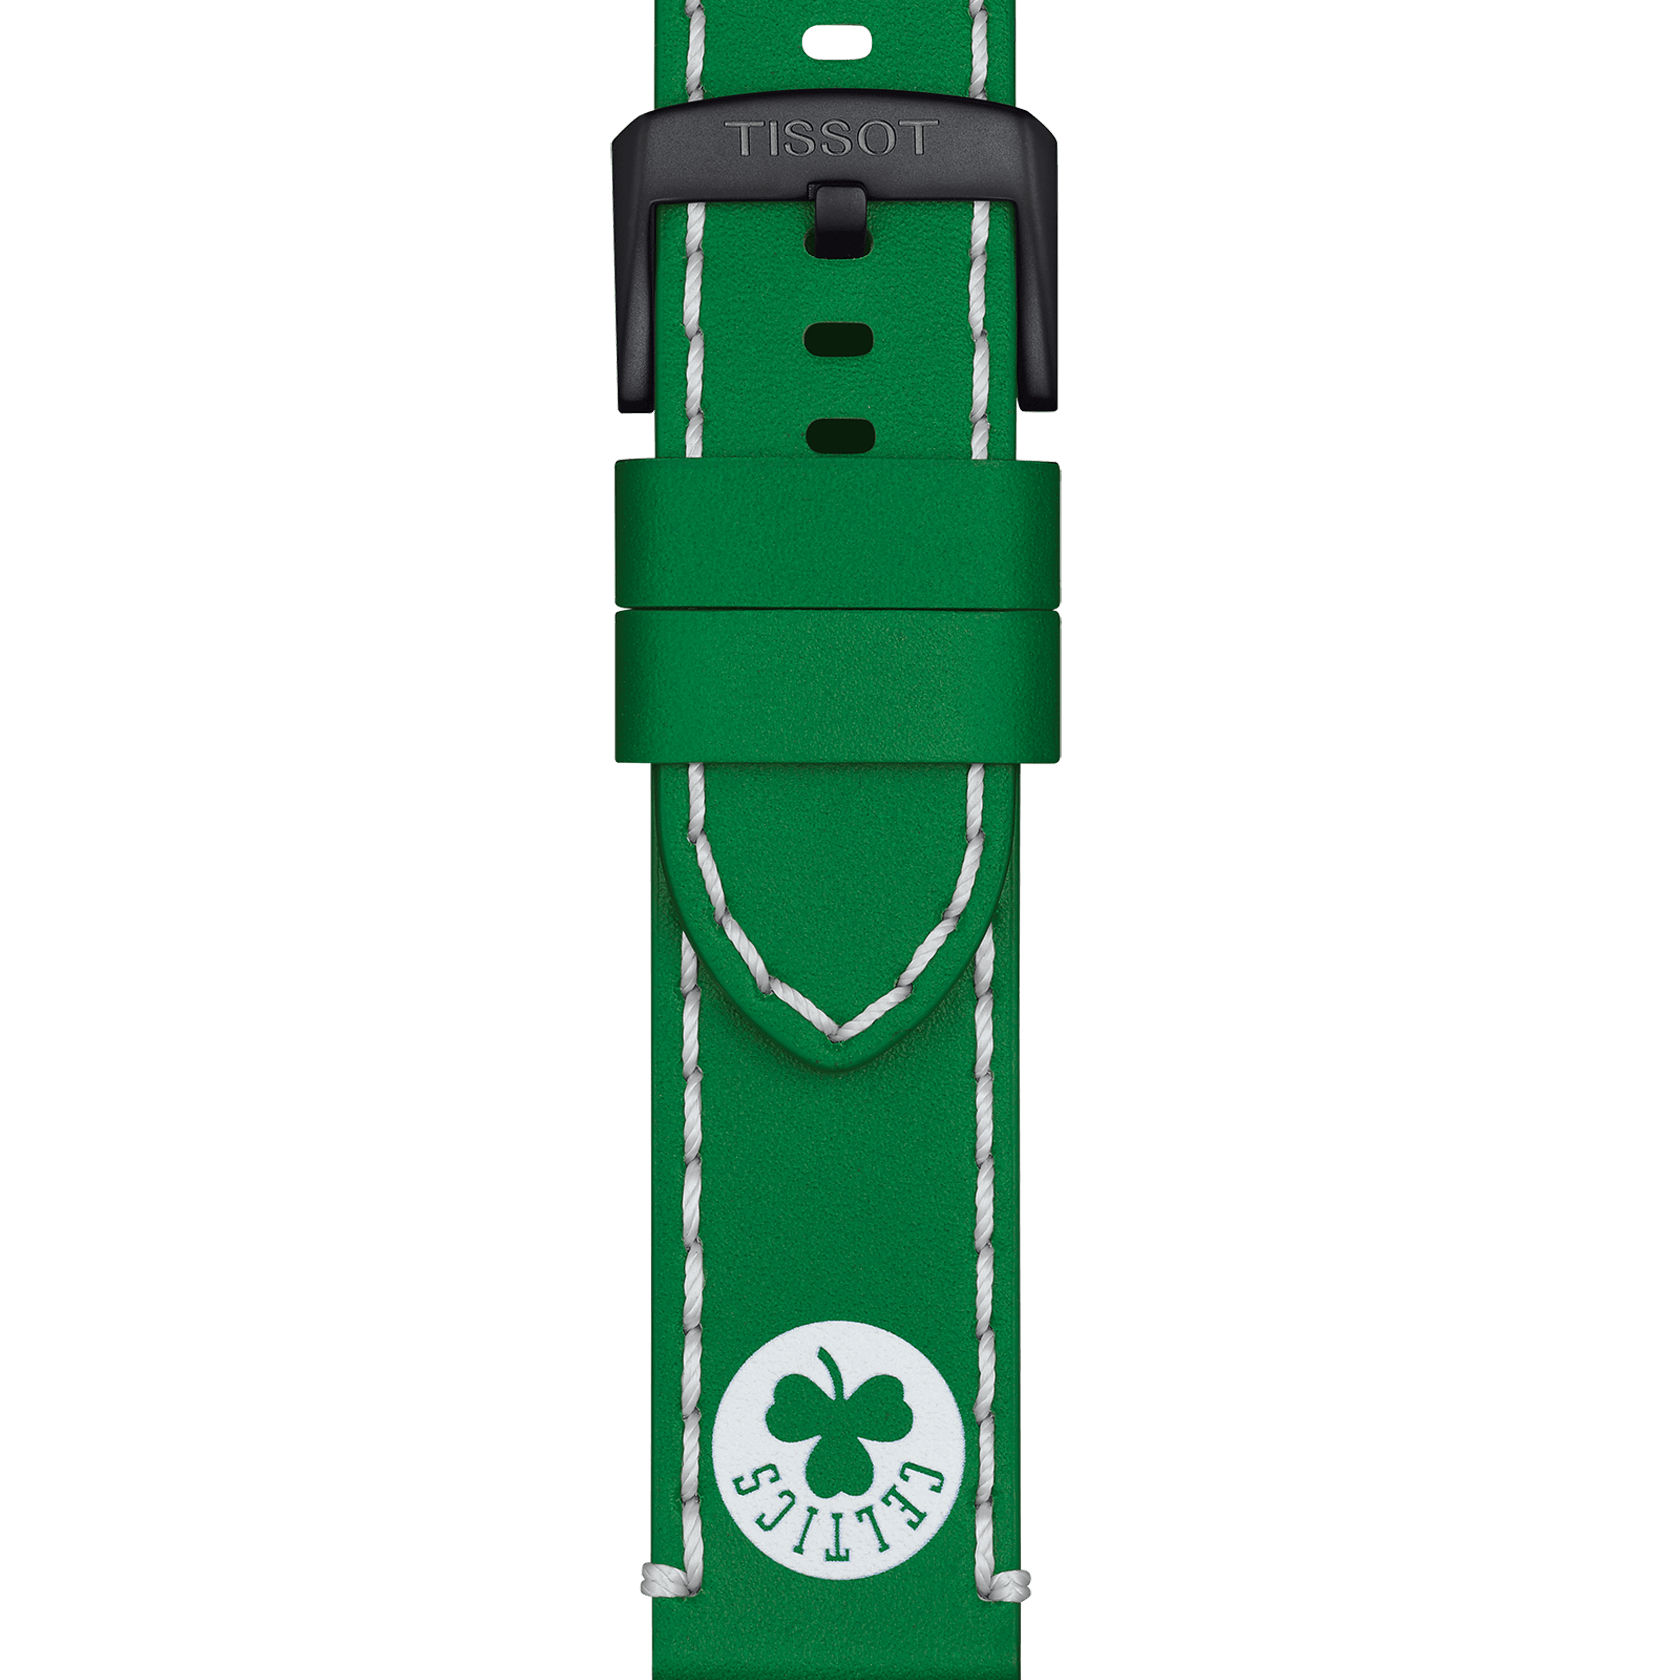 Tissot Official NBA leather strap Boston Celtics Limited Edition 22mm